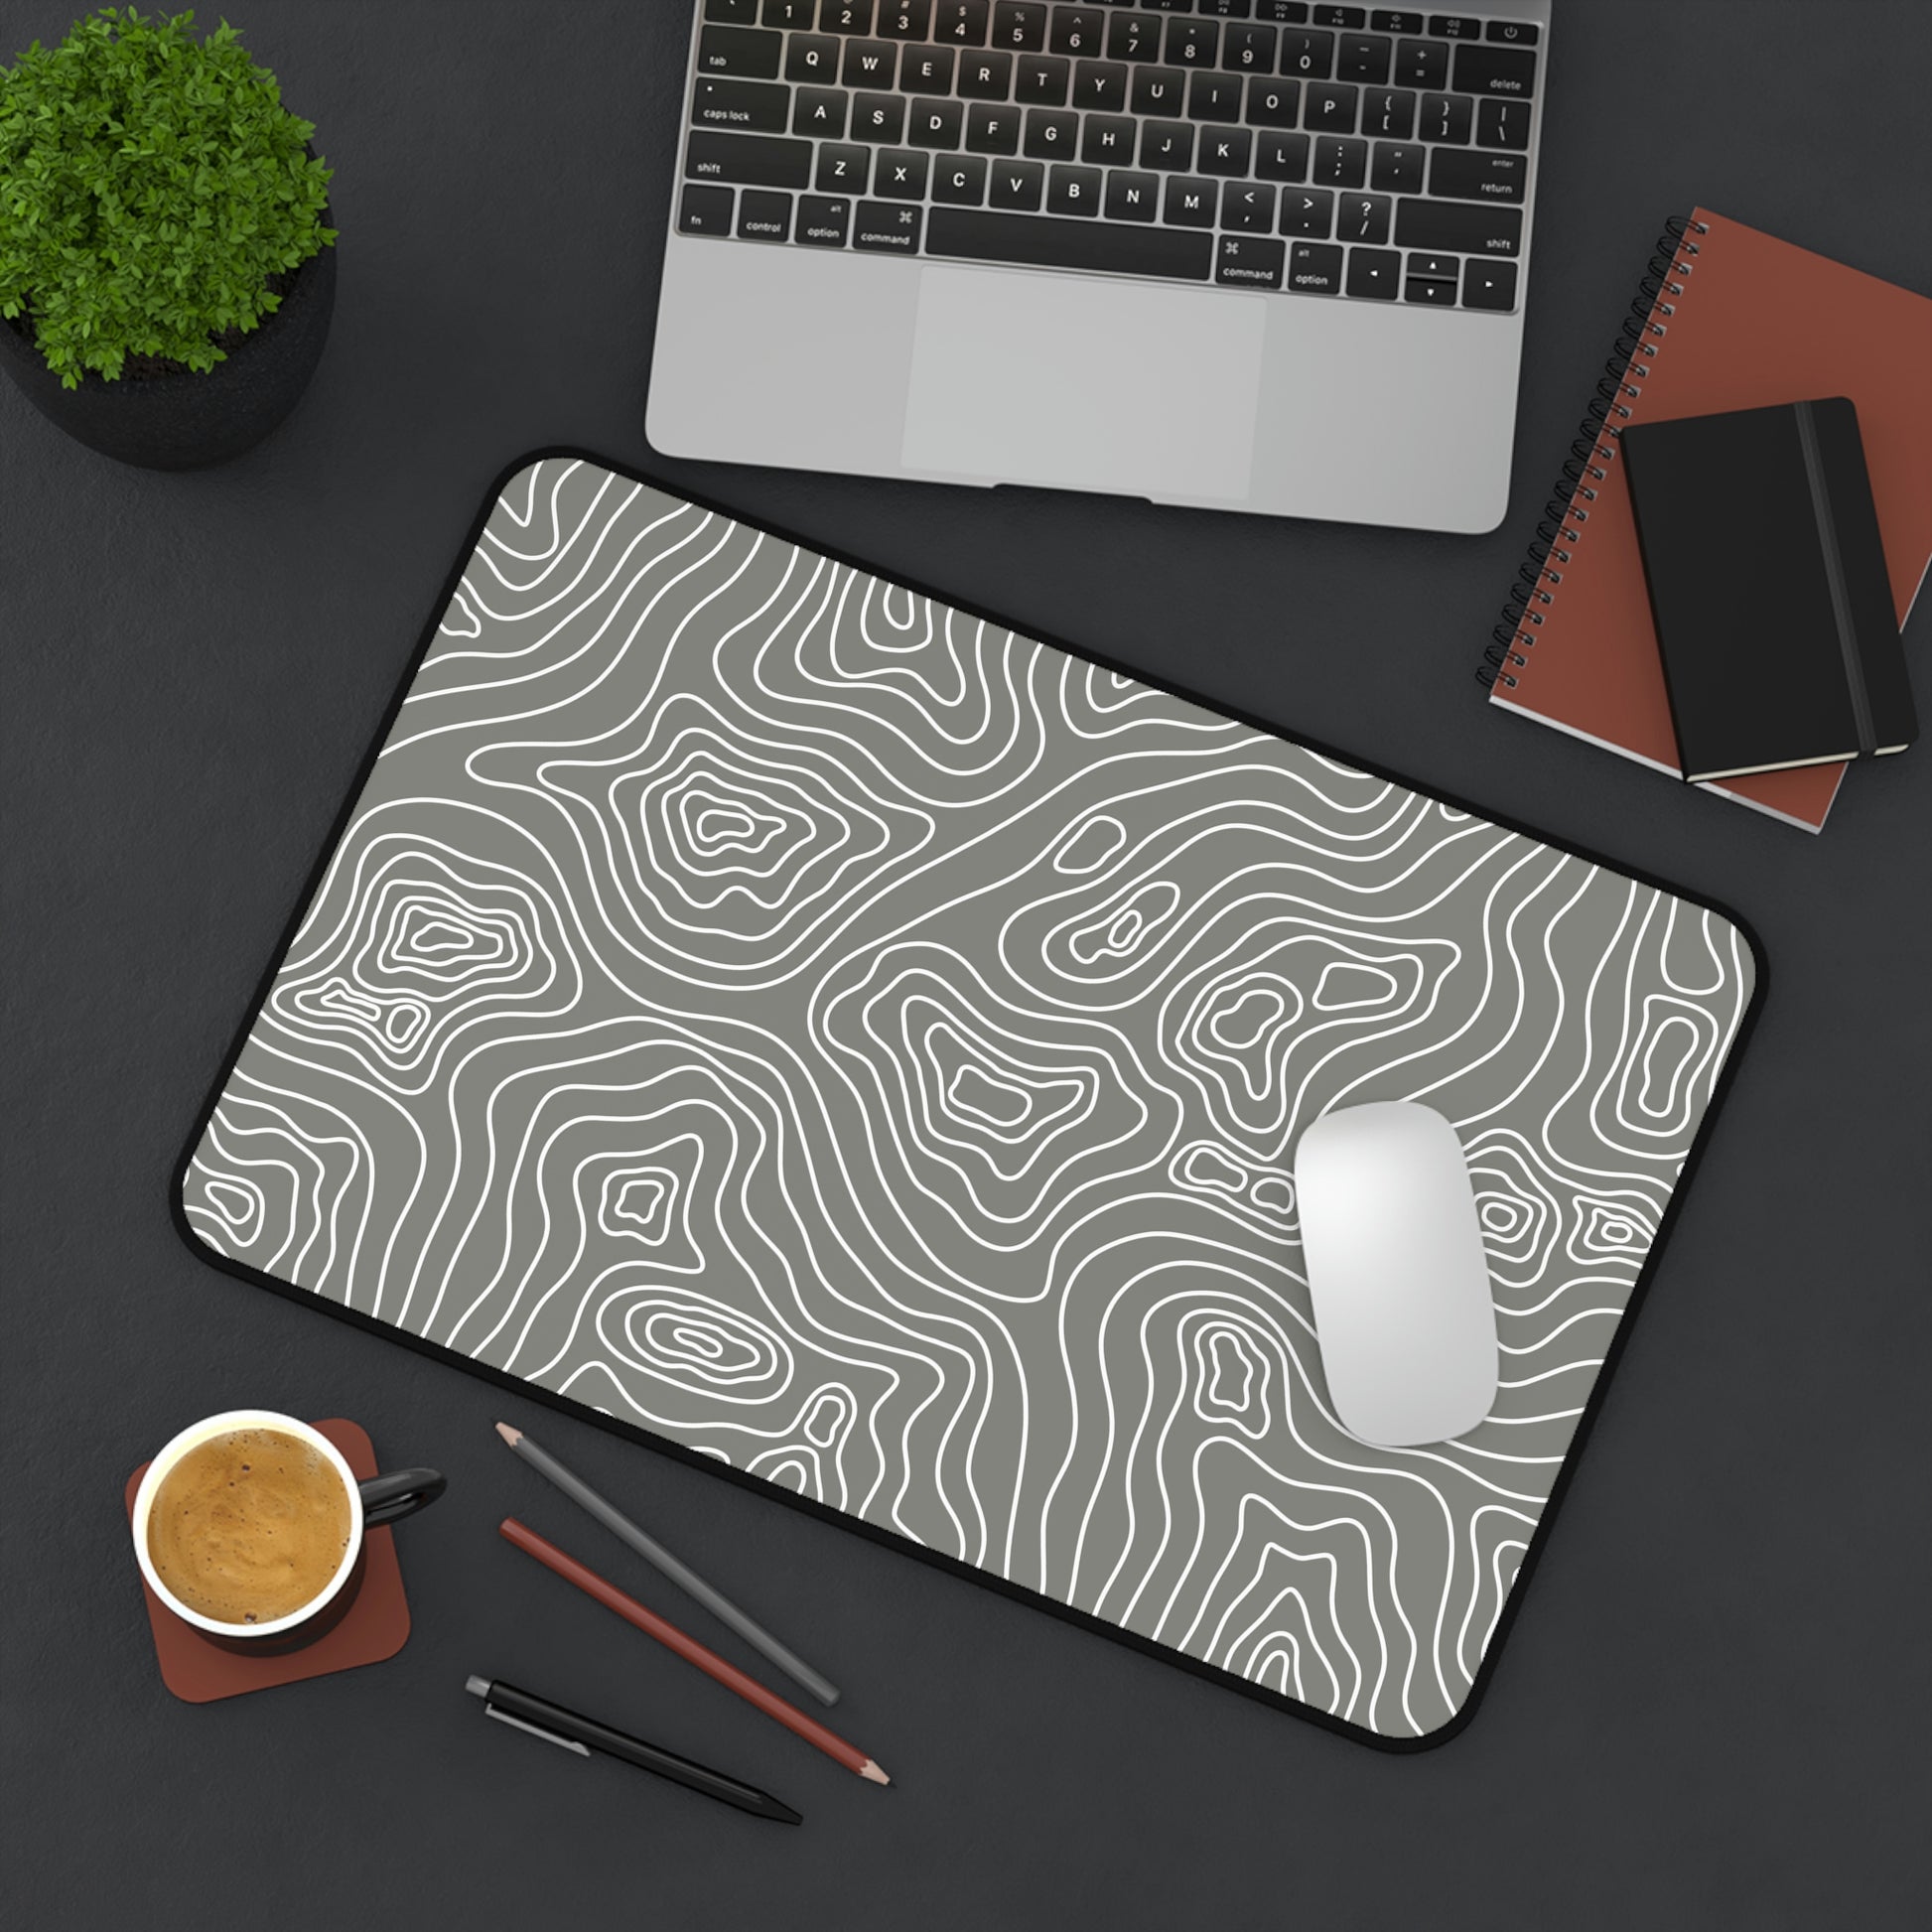 A 12" x 18" gray desk mat with white topographic lines sitting at an angle. A mouse sits on top of it.